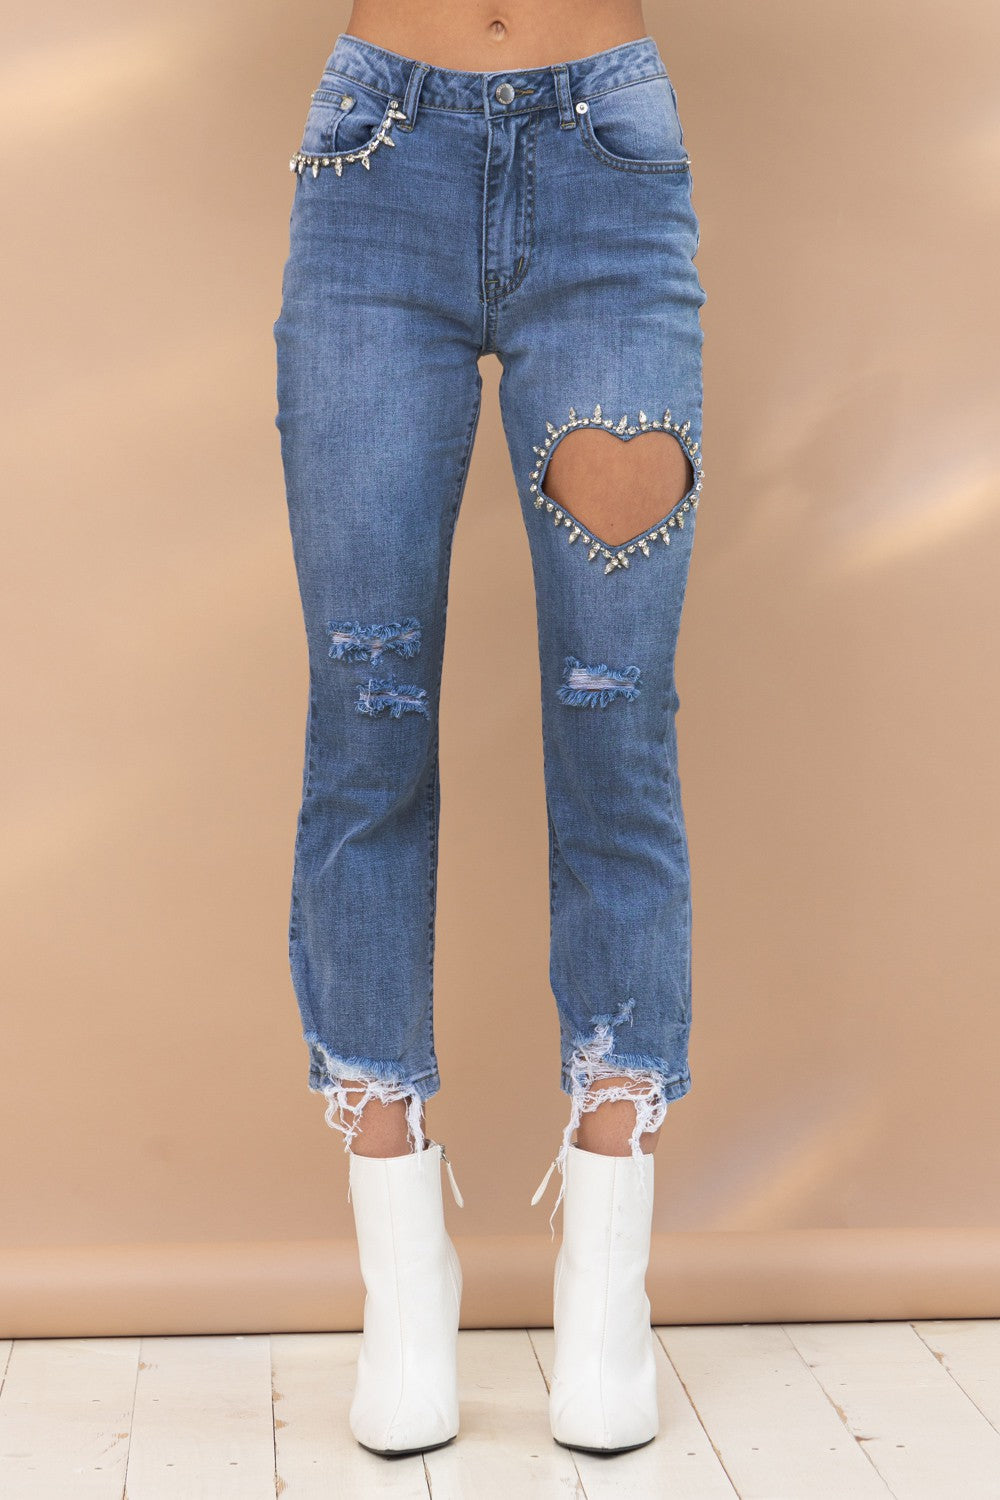 Hearts On Our Leg Denim Jeans